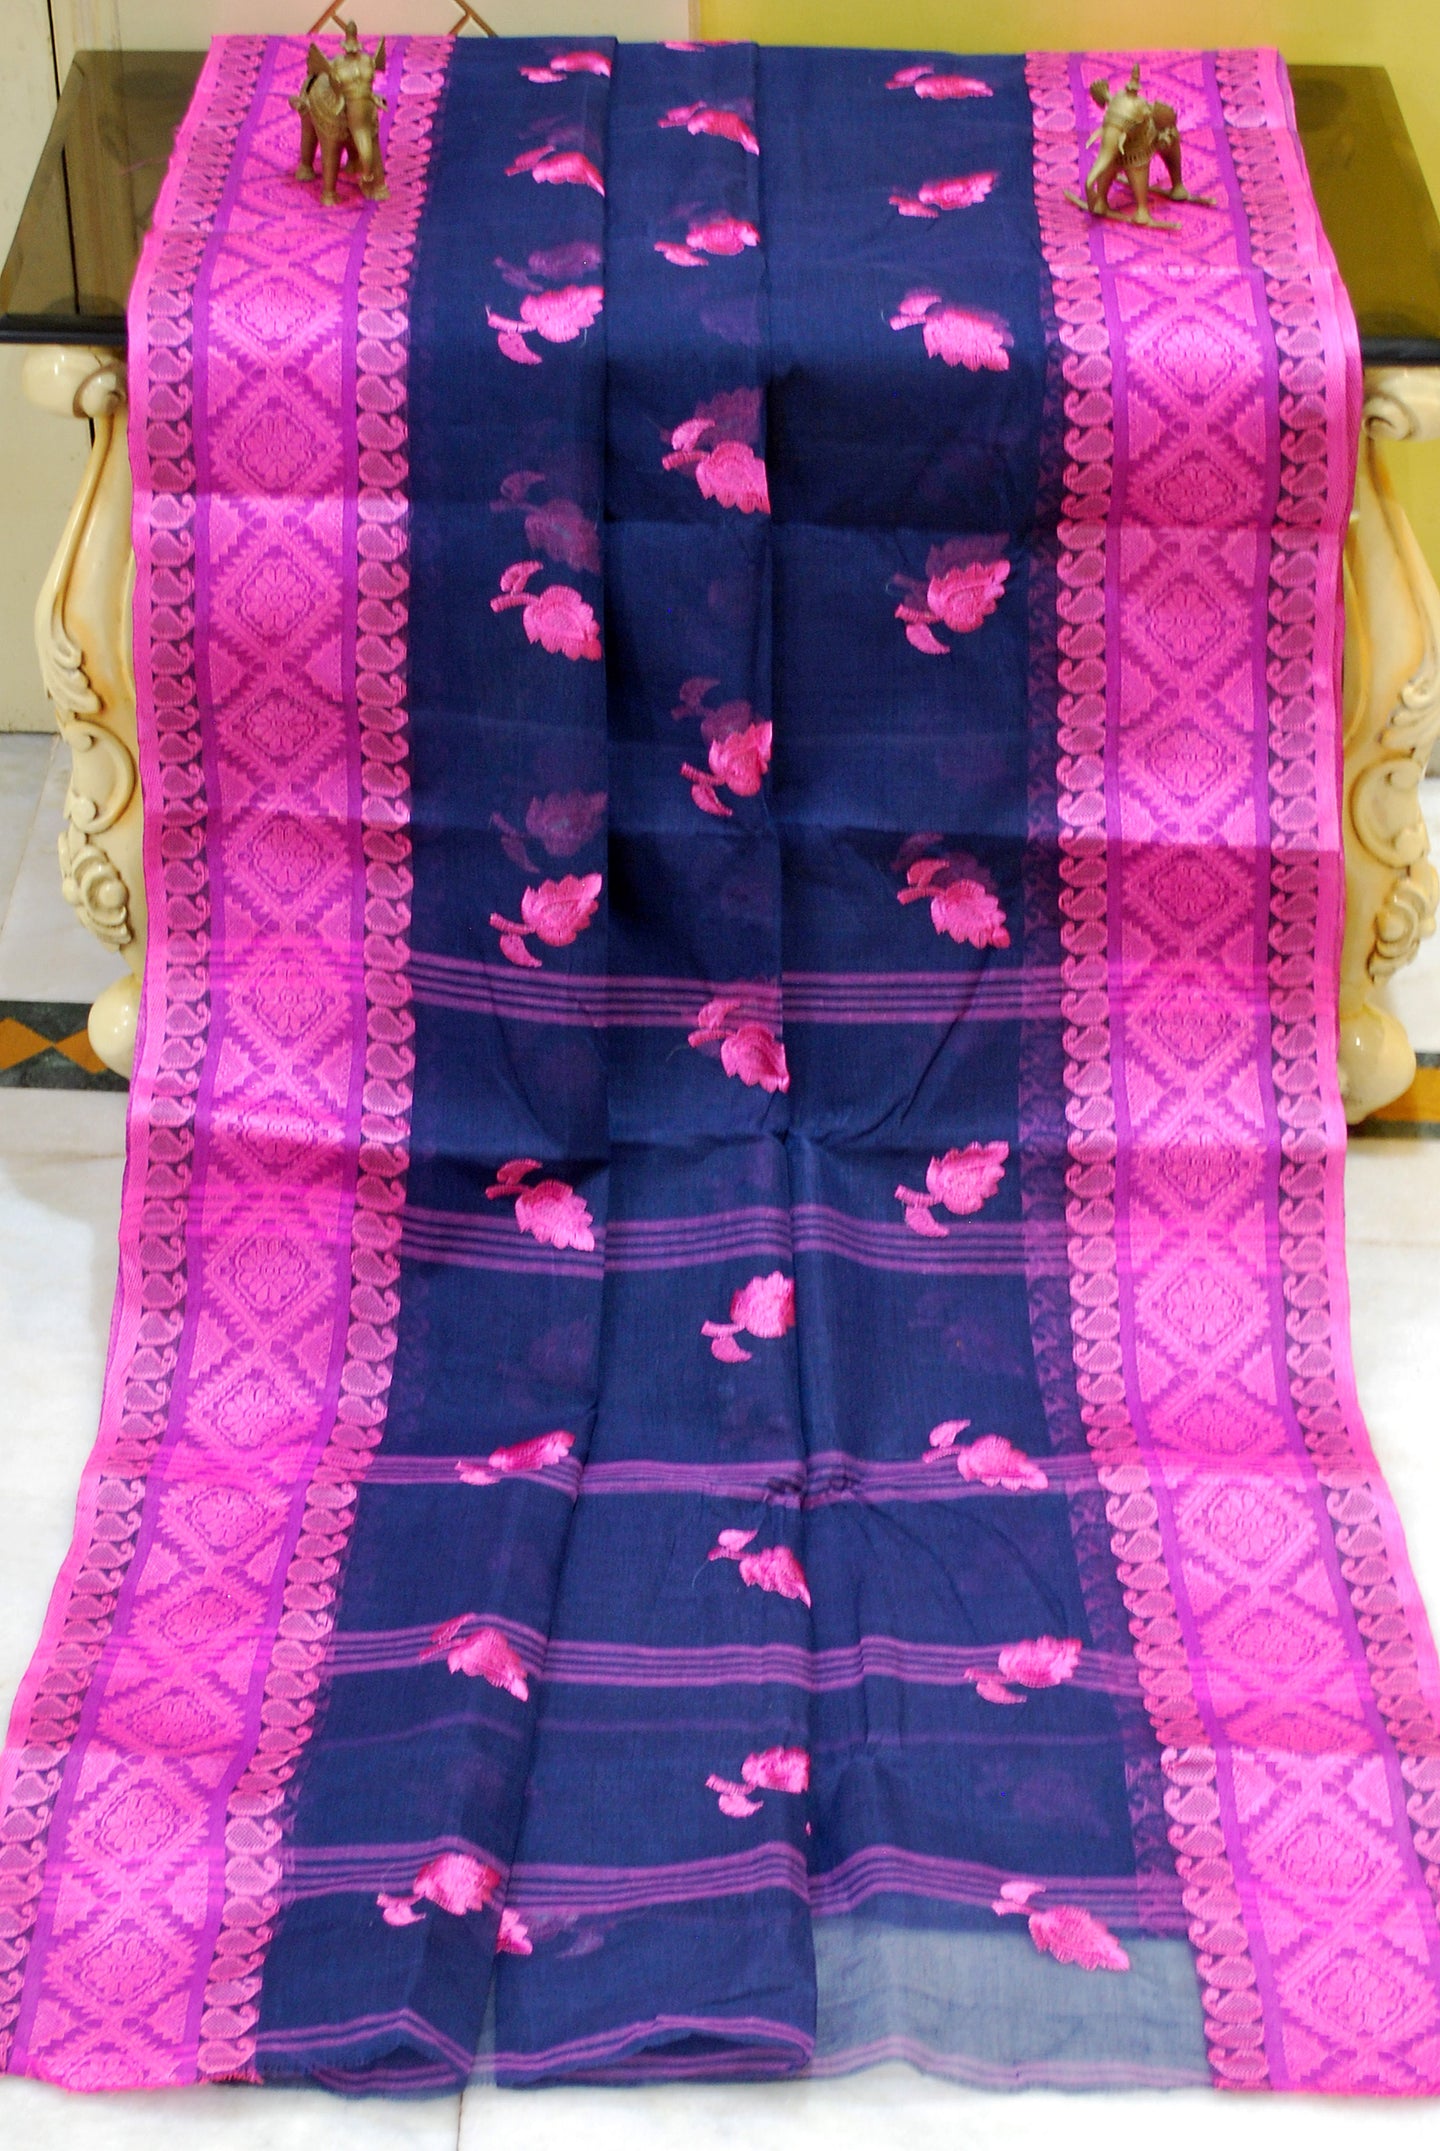 Bengal Handloom Cotton Saree with Leaf Motif Embroidery Work in Midnight Blue and Hot Pink